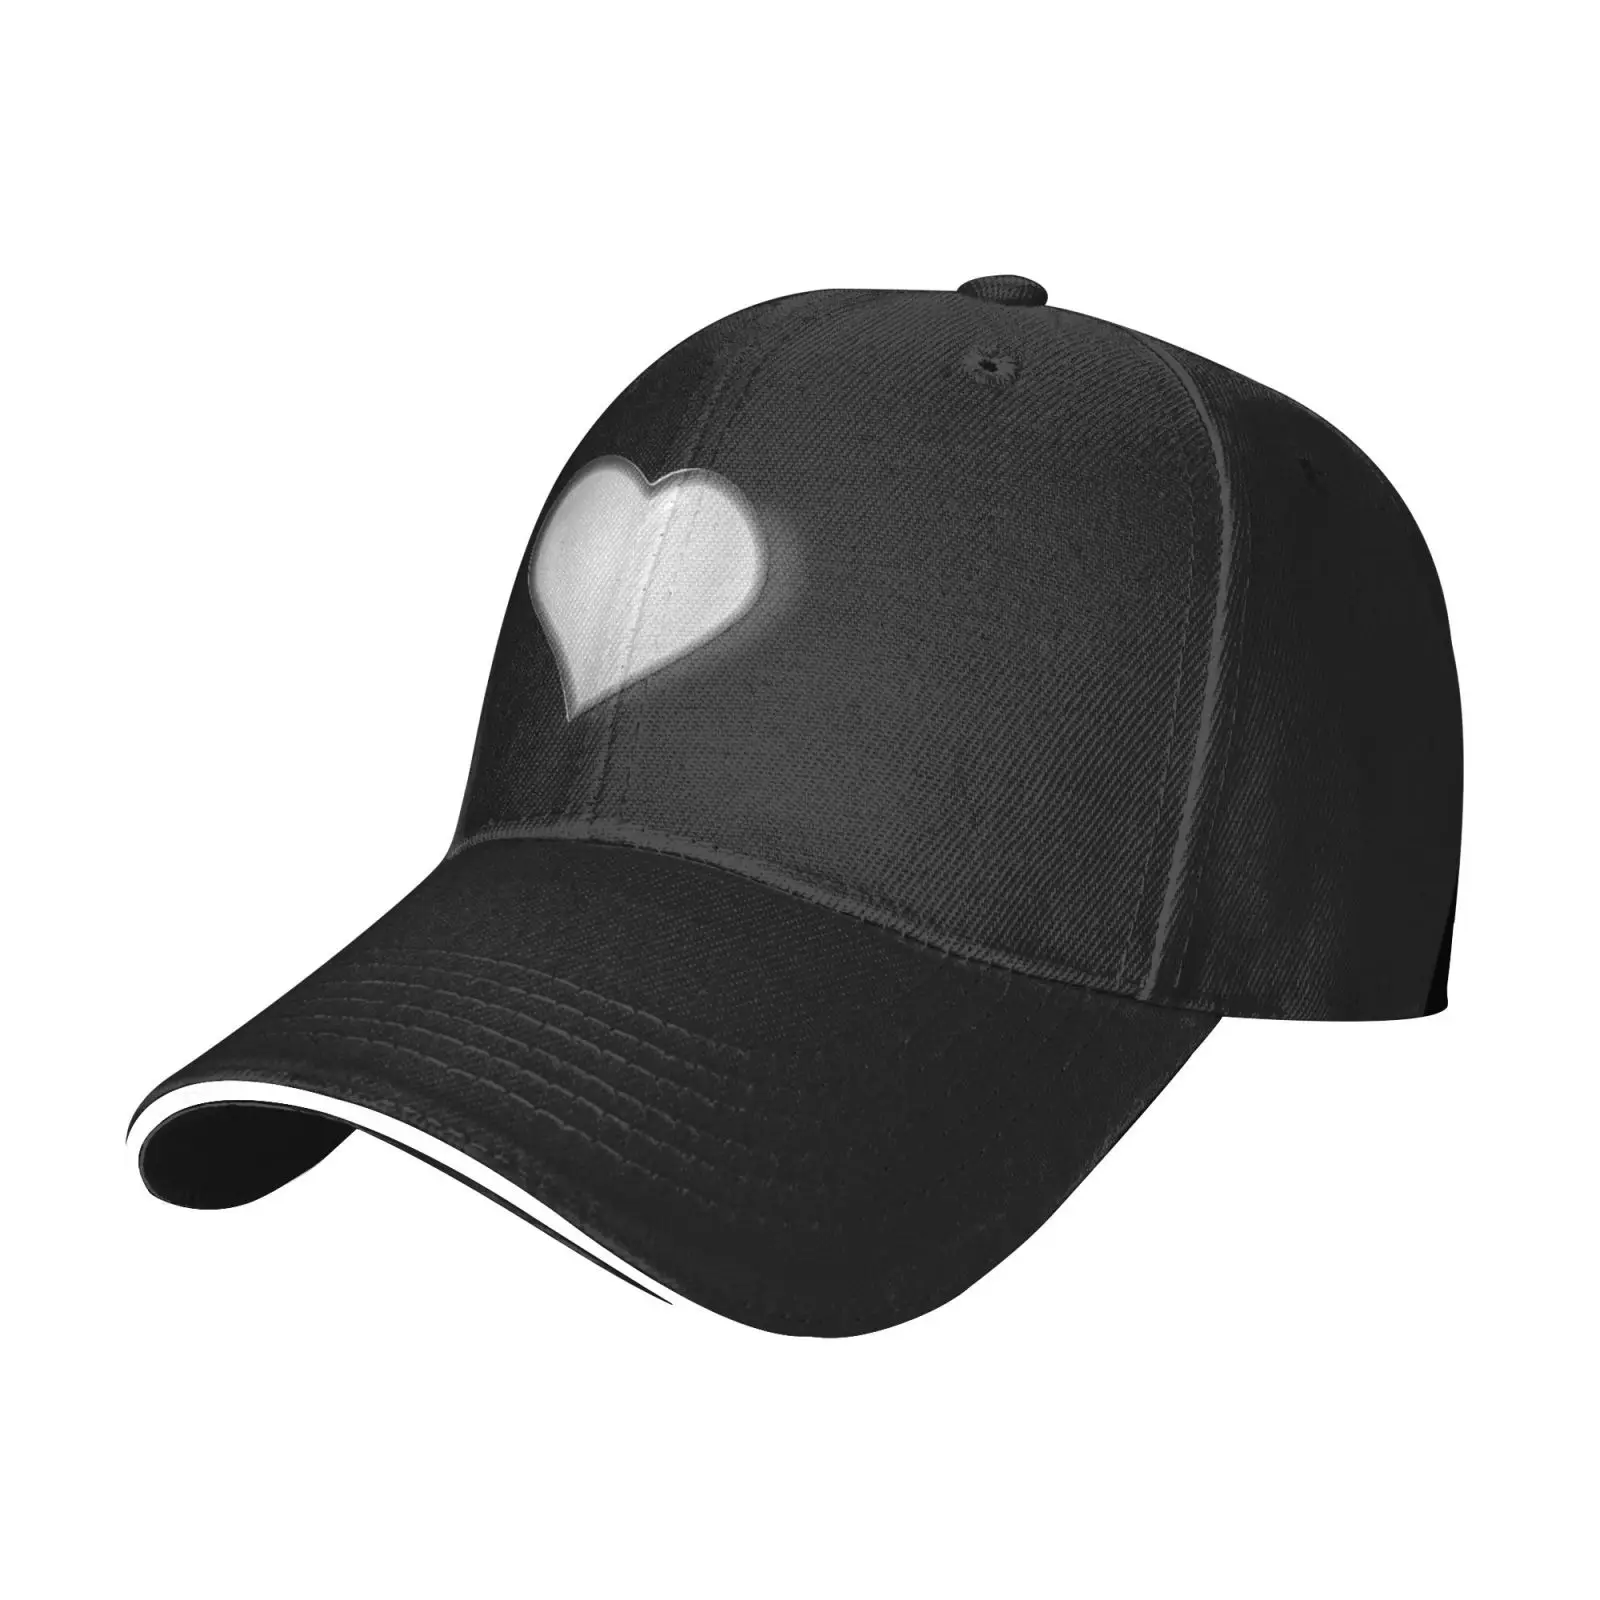 

Silvery Heart Cool Baseball Cap Adjustable Cotton or Polyester Lightweight Polyester Adult Four Seasons Casual Simple Design